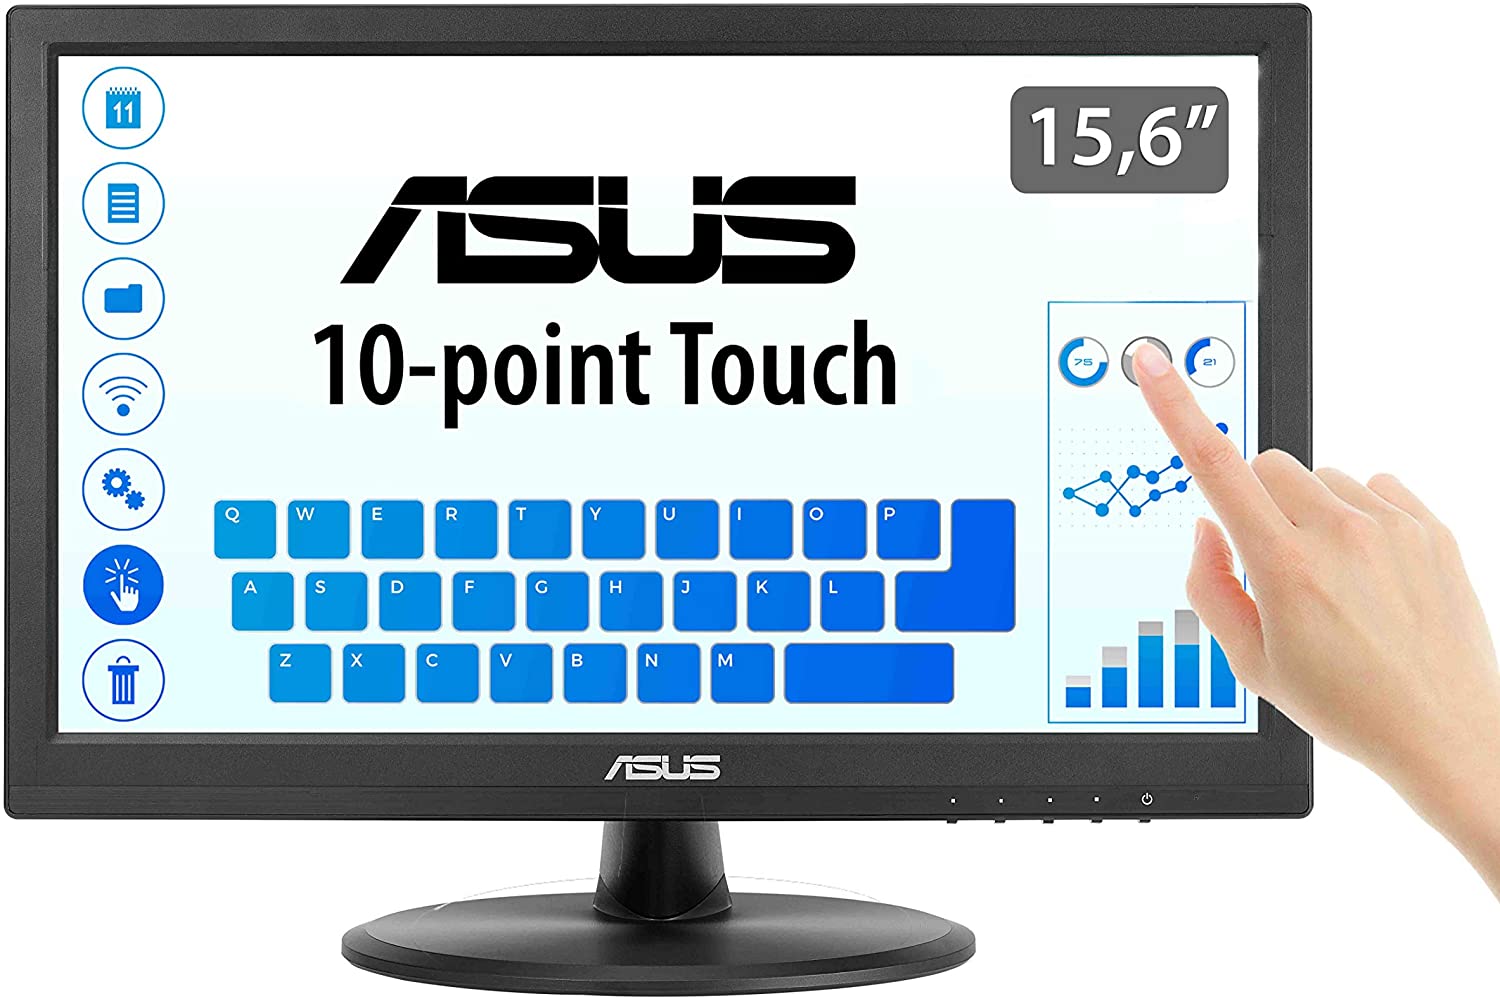 ASUS VT168N point touch.